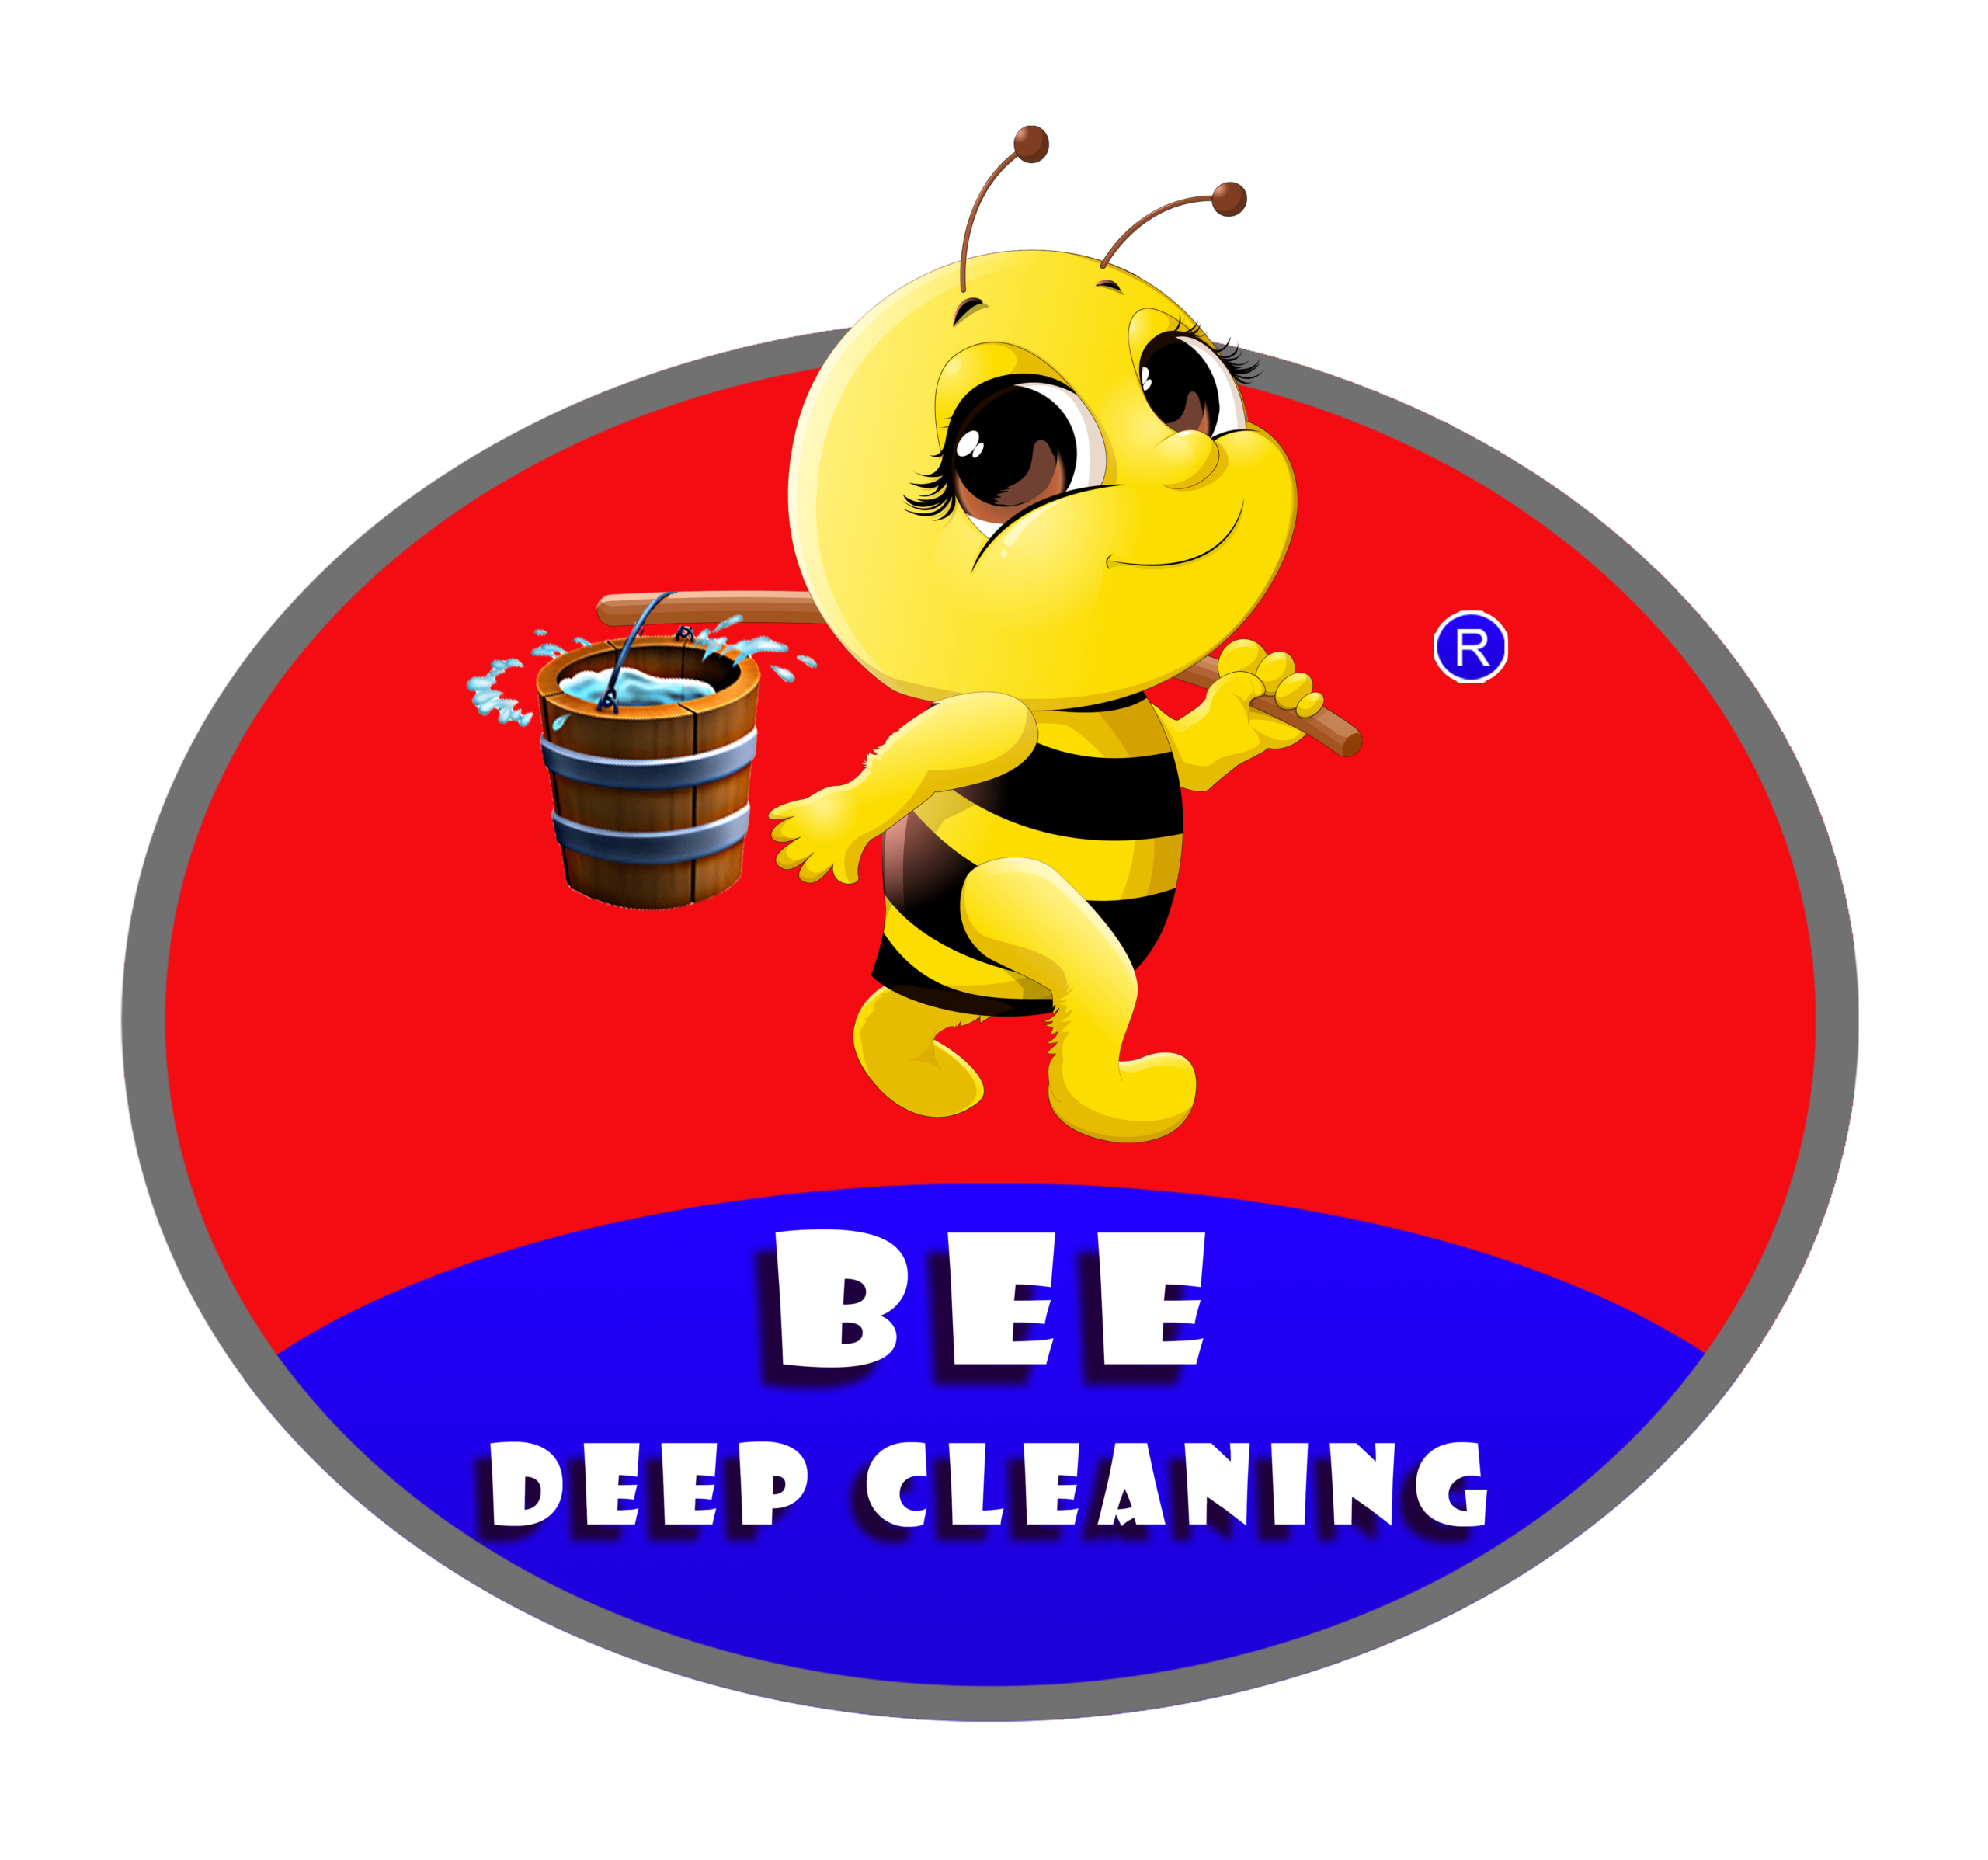 Bee Deep Cleaning | Mobile Auto Detailing and Car Wash Services